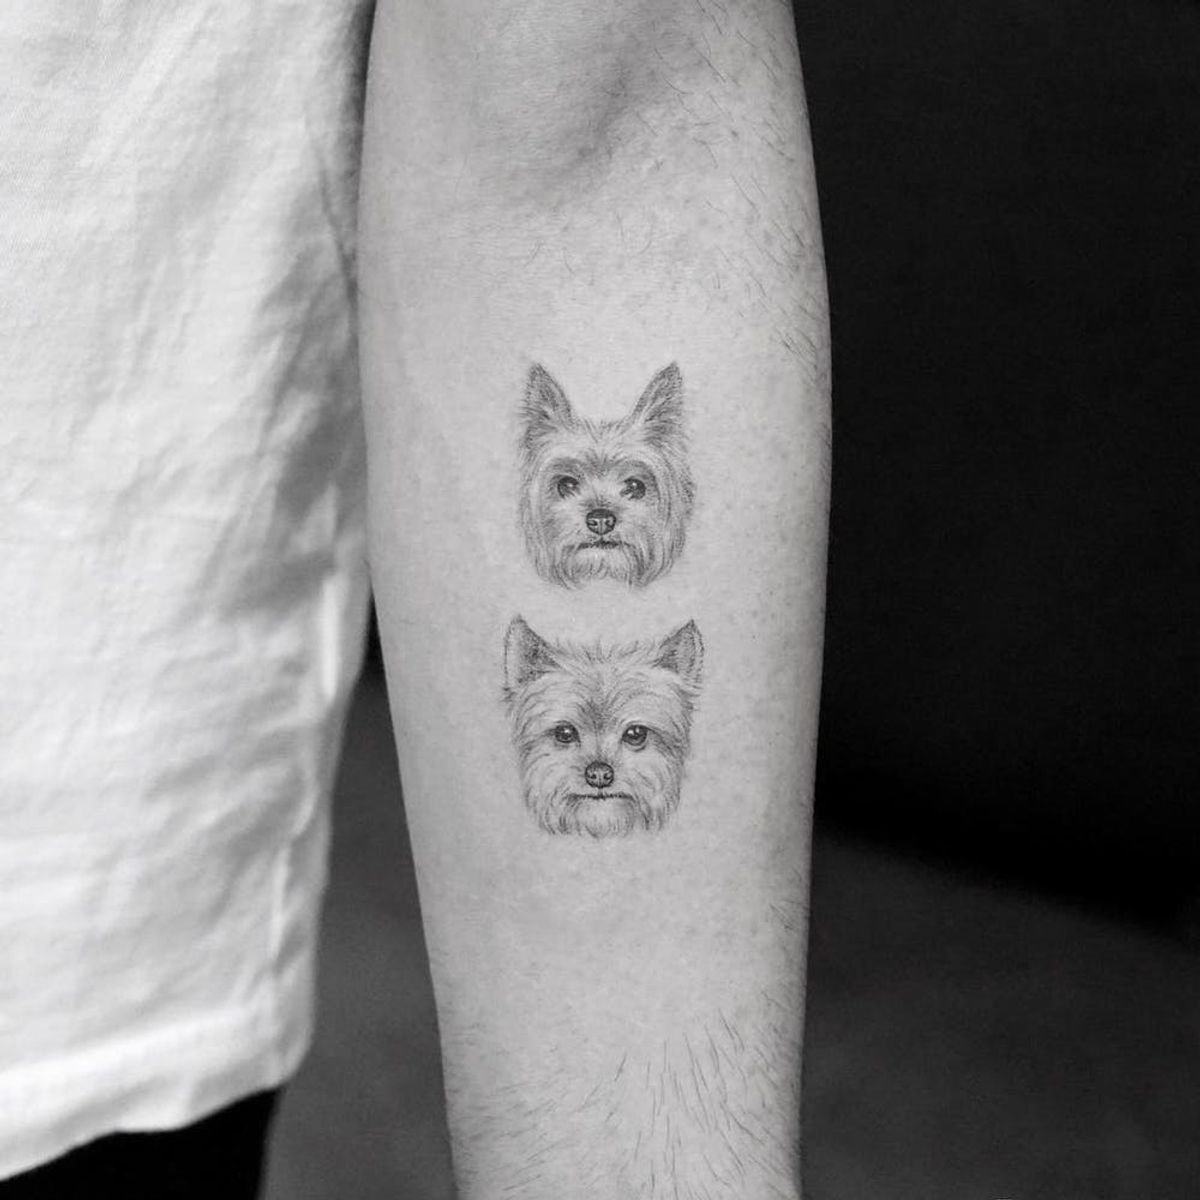 13 of the Cutest Animal Tattoos You Have to See